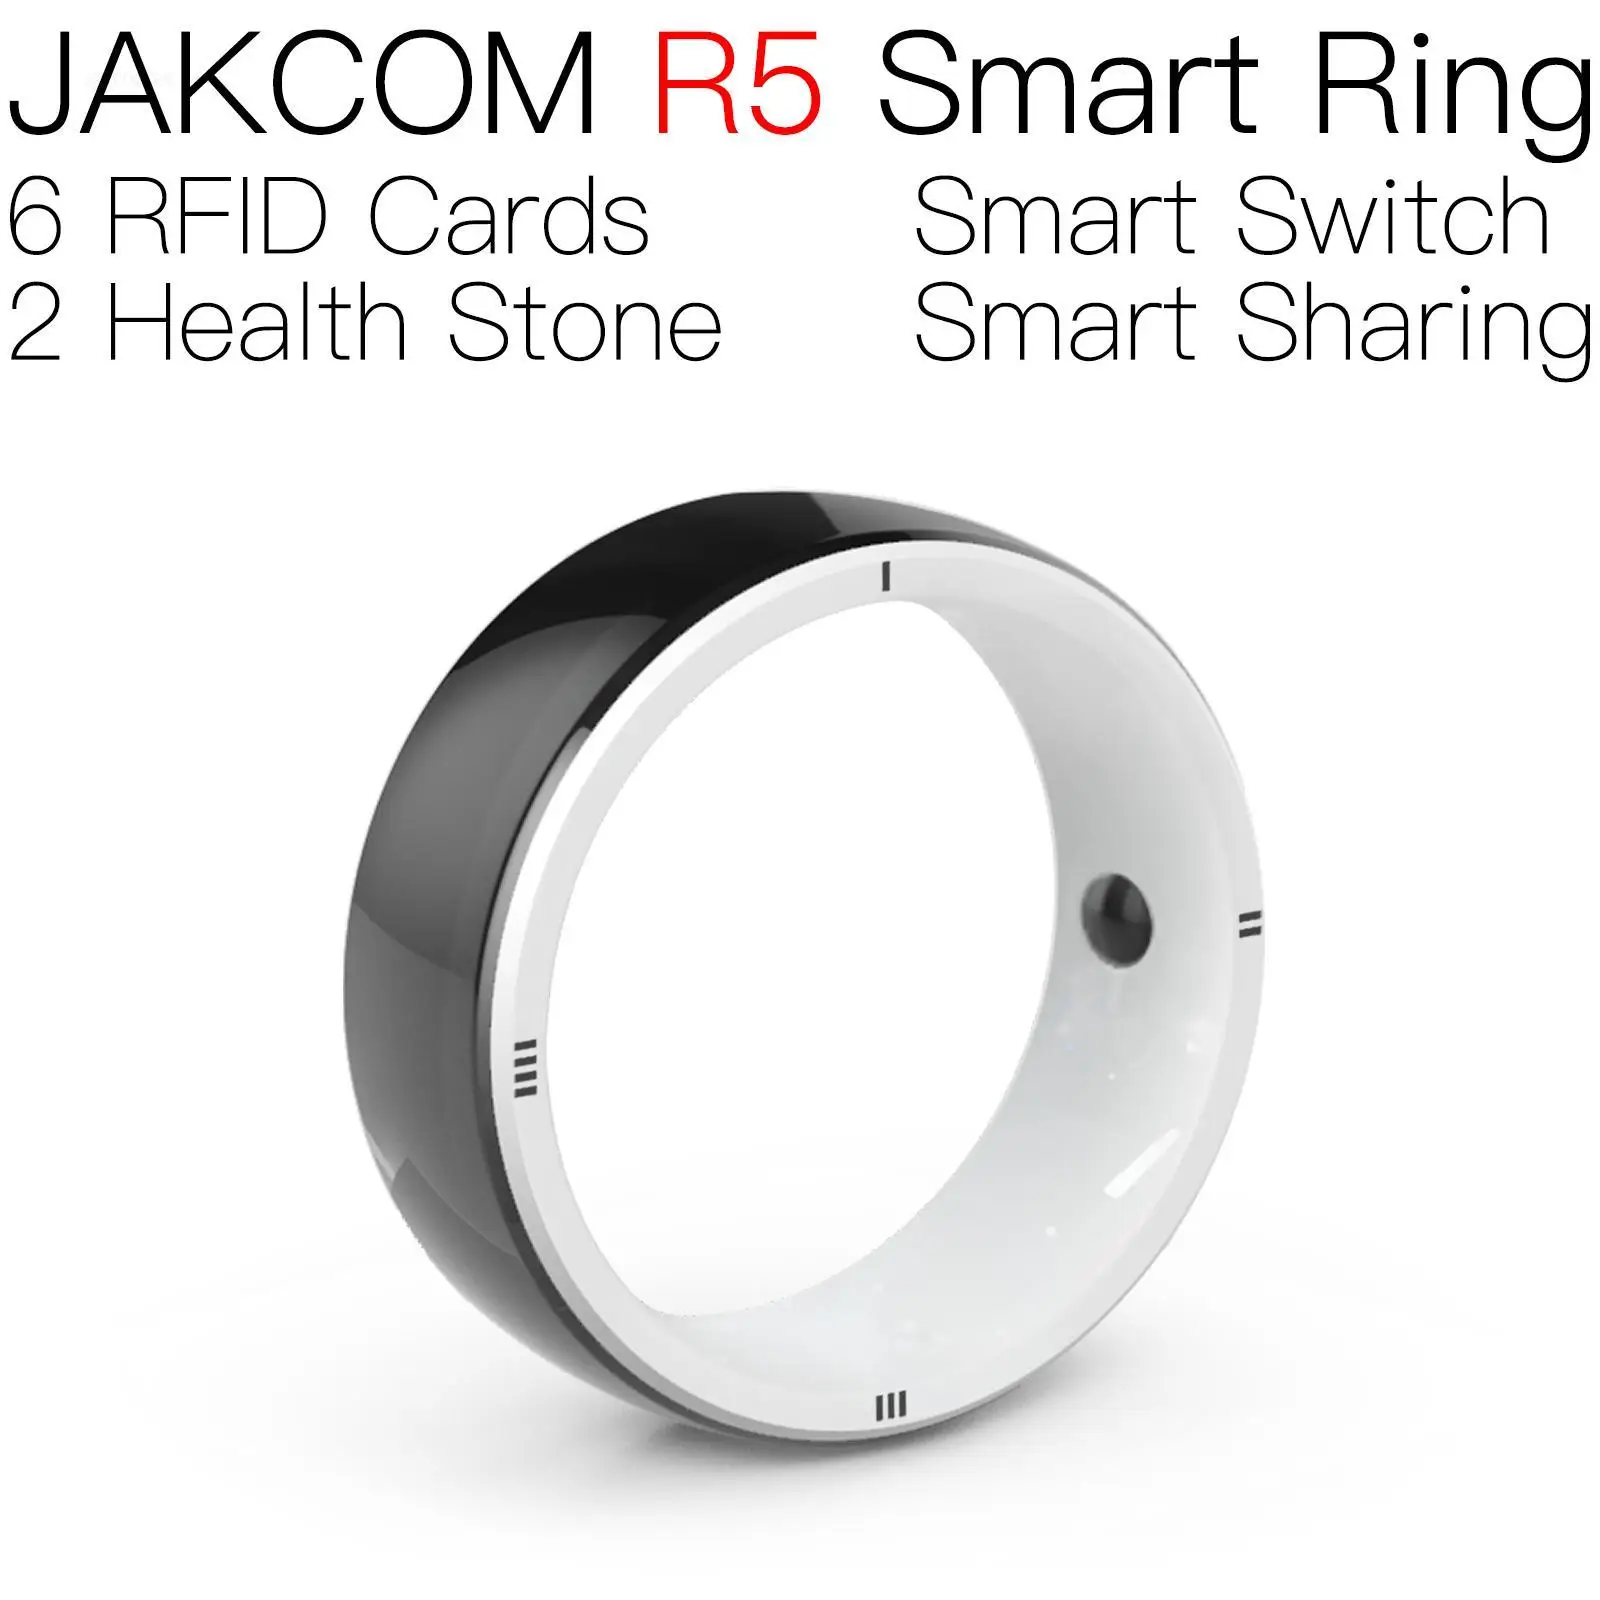 

JAKCOM R5 Smart Ring Super value than rfid tags protect stickers tag huer nfc chip copy 125khz card id printer acr122 software